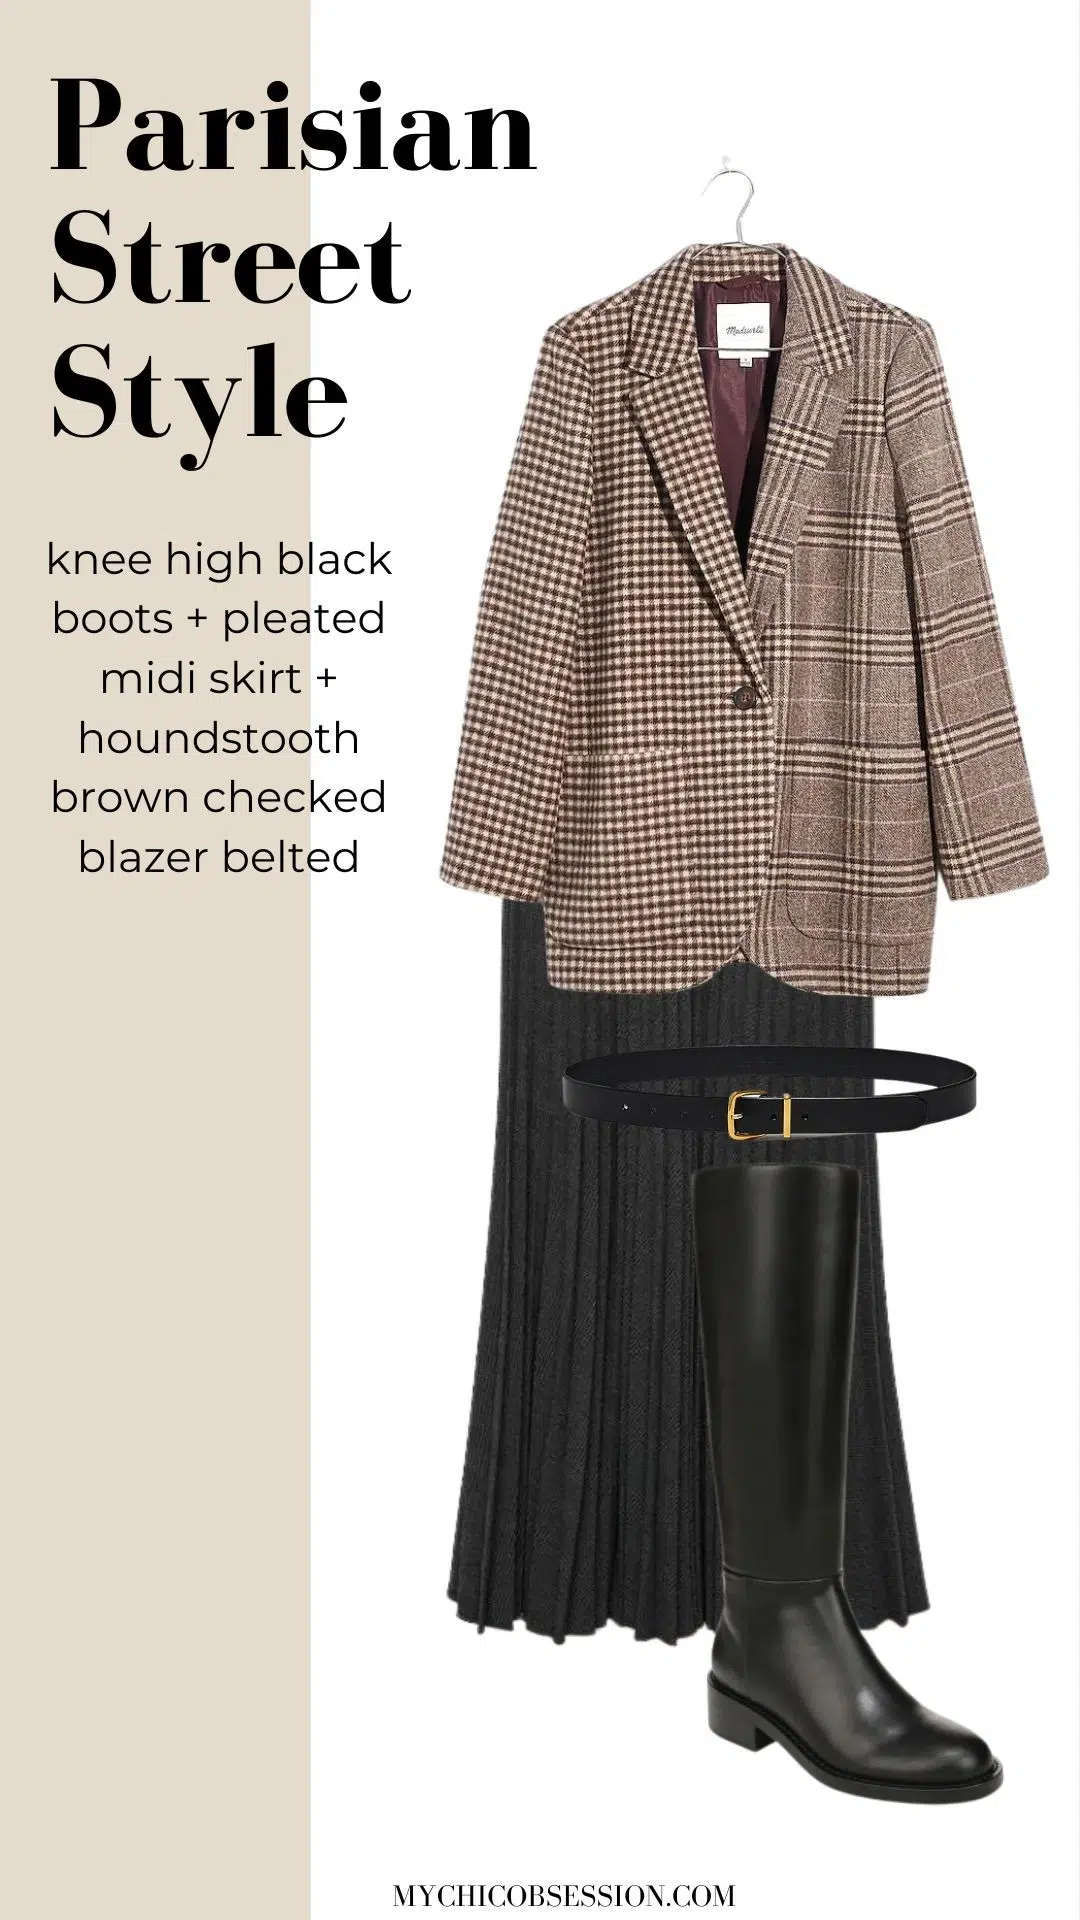 knee high black boots + pleated midi skirt + houndstooth brown checked blazer belted